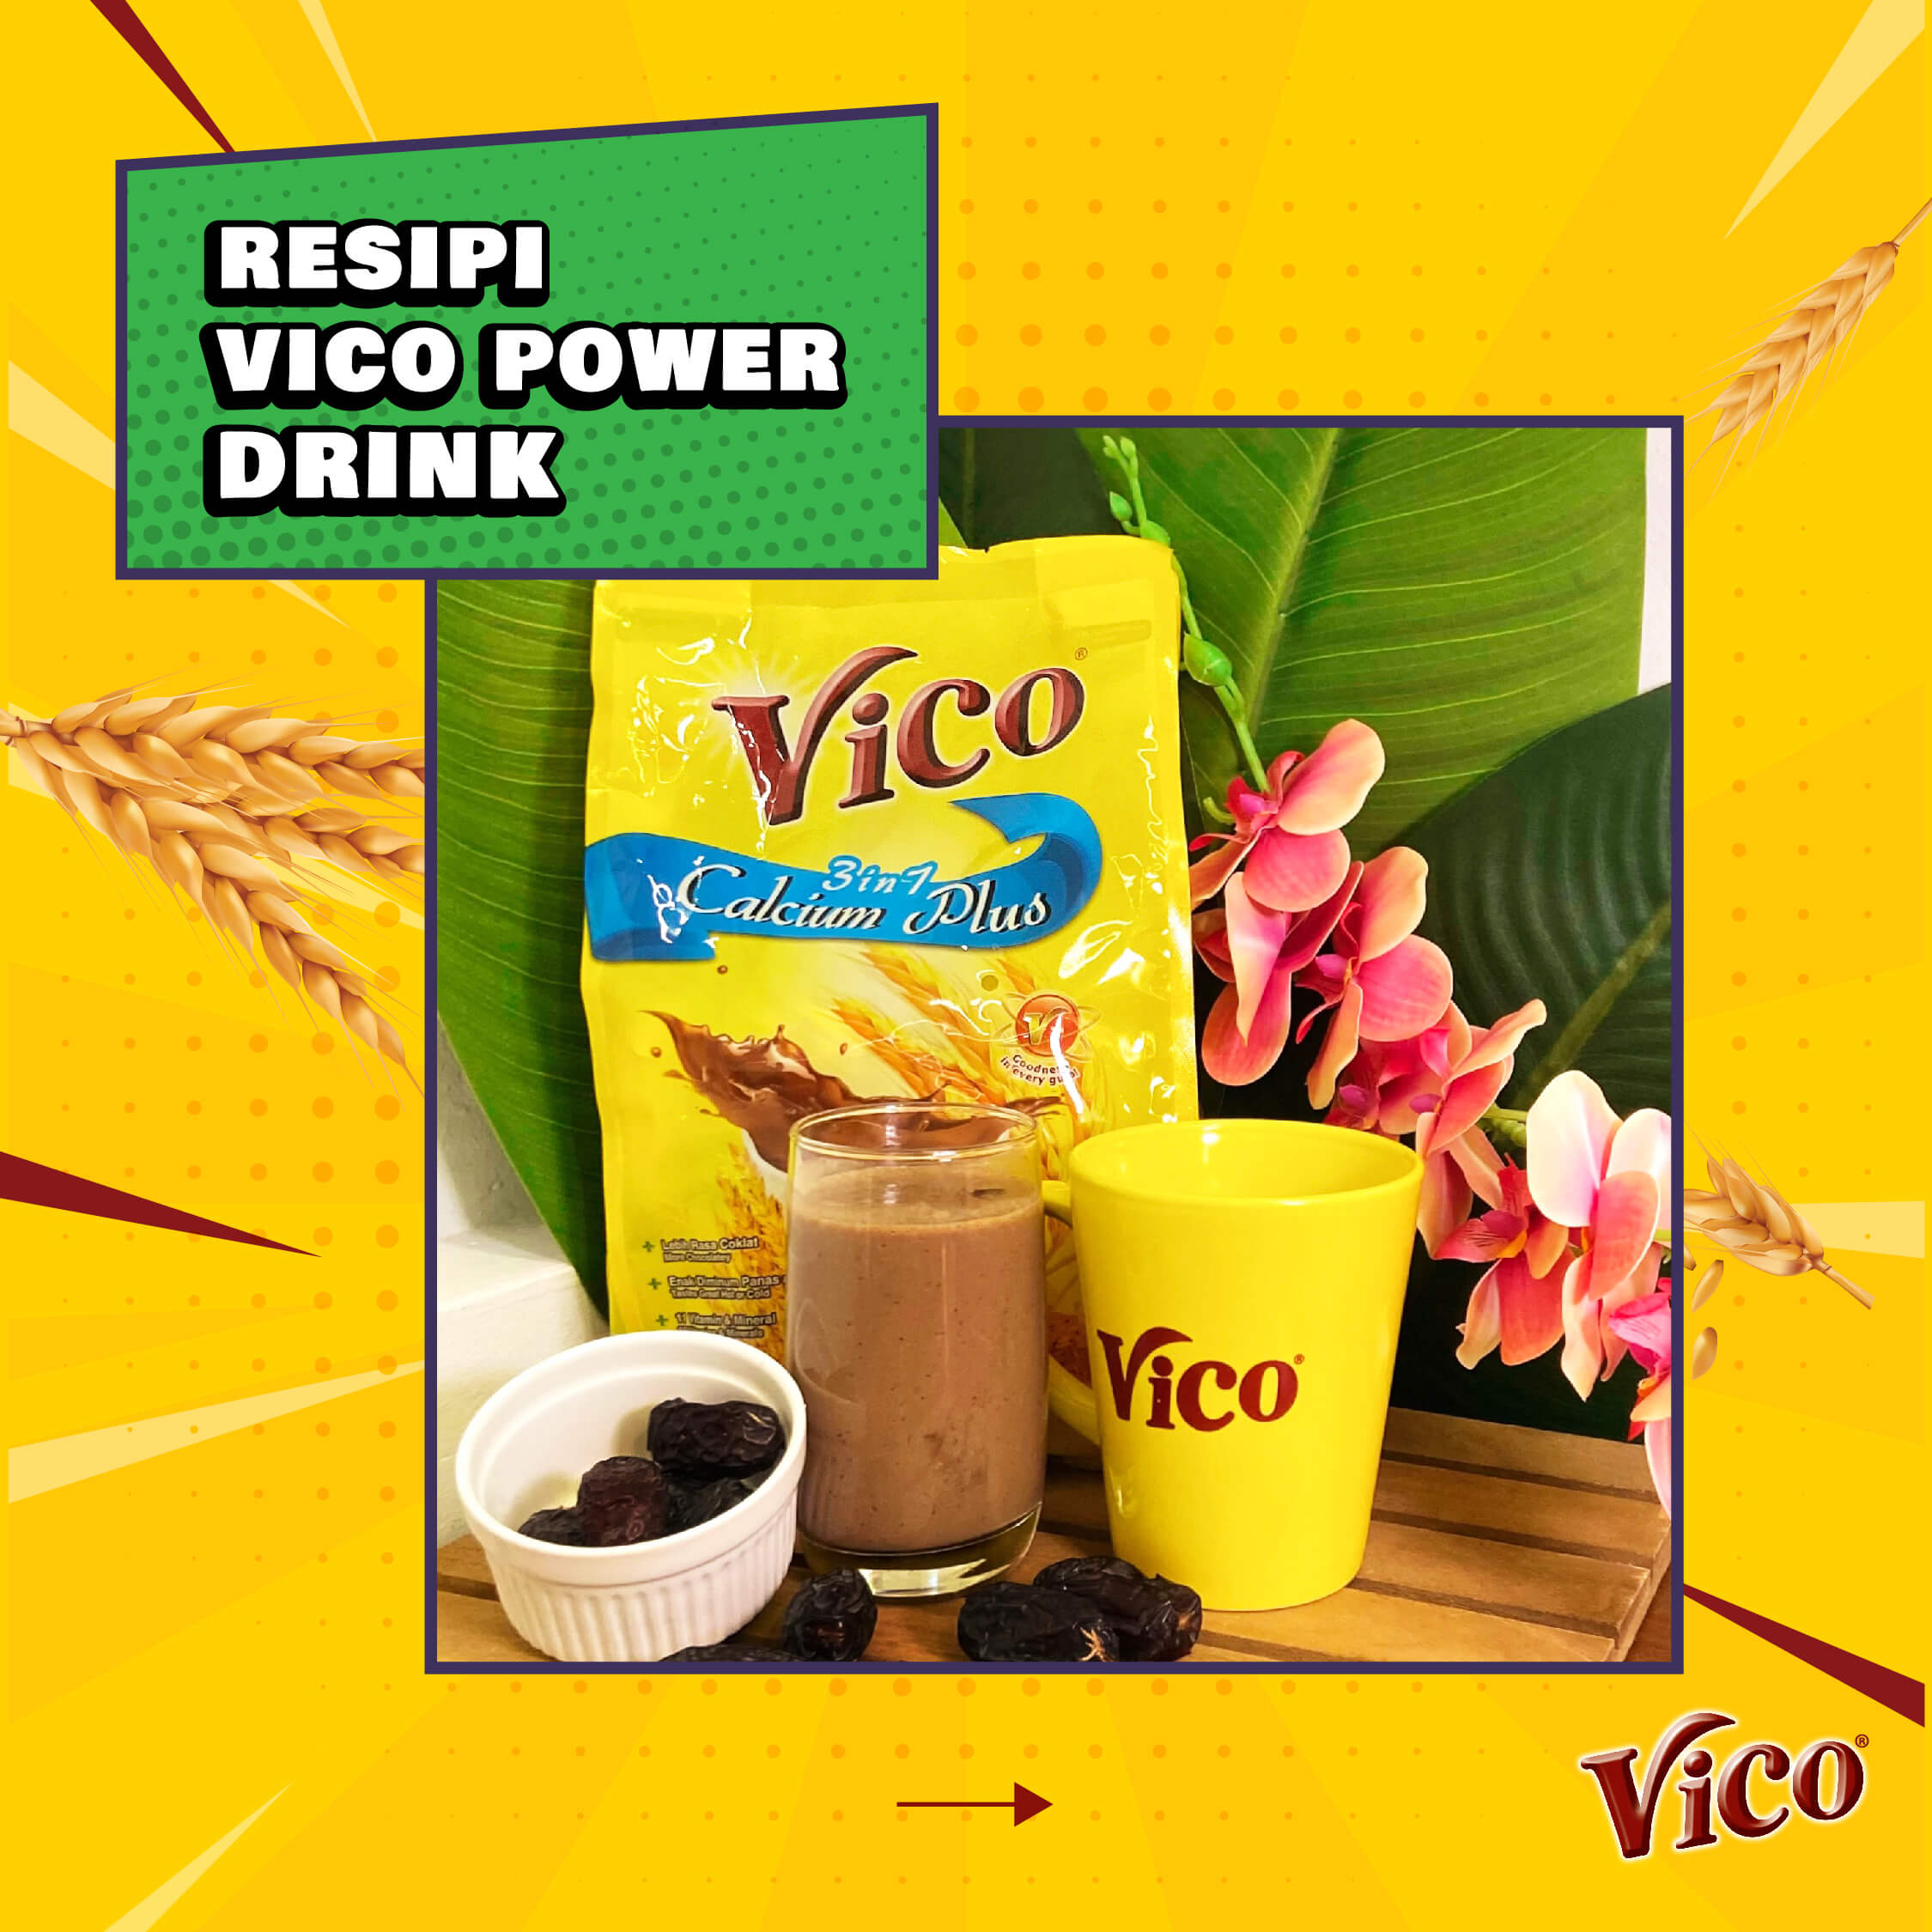 Resipi Vico Power Drink​